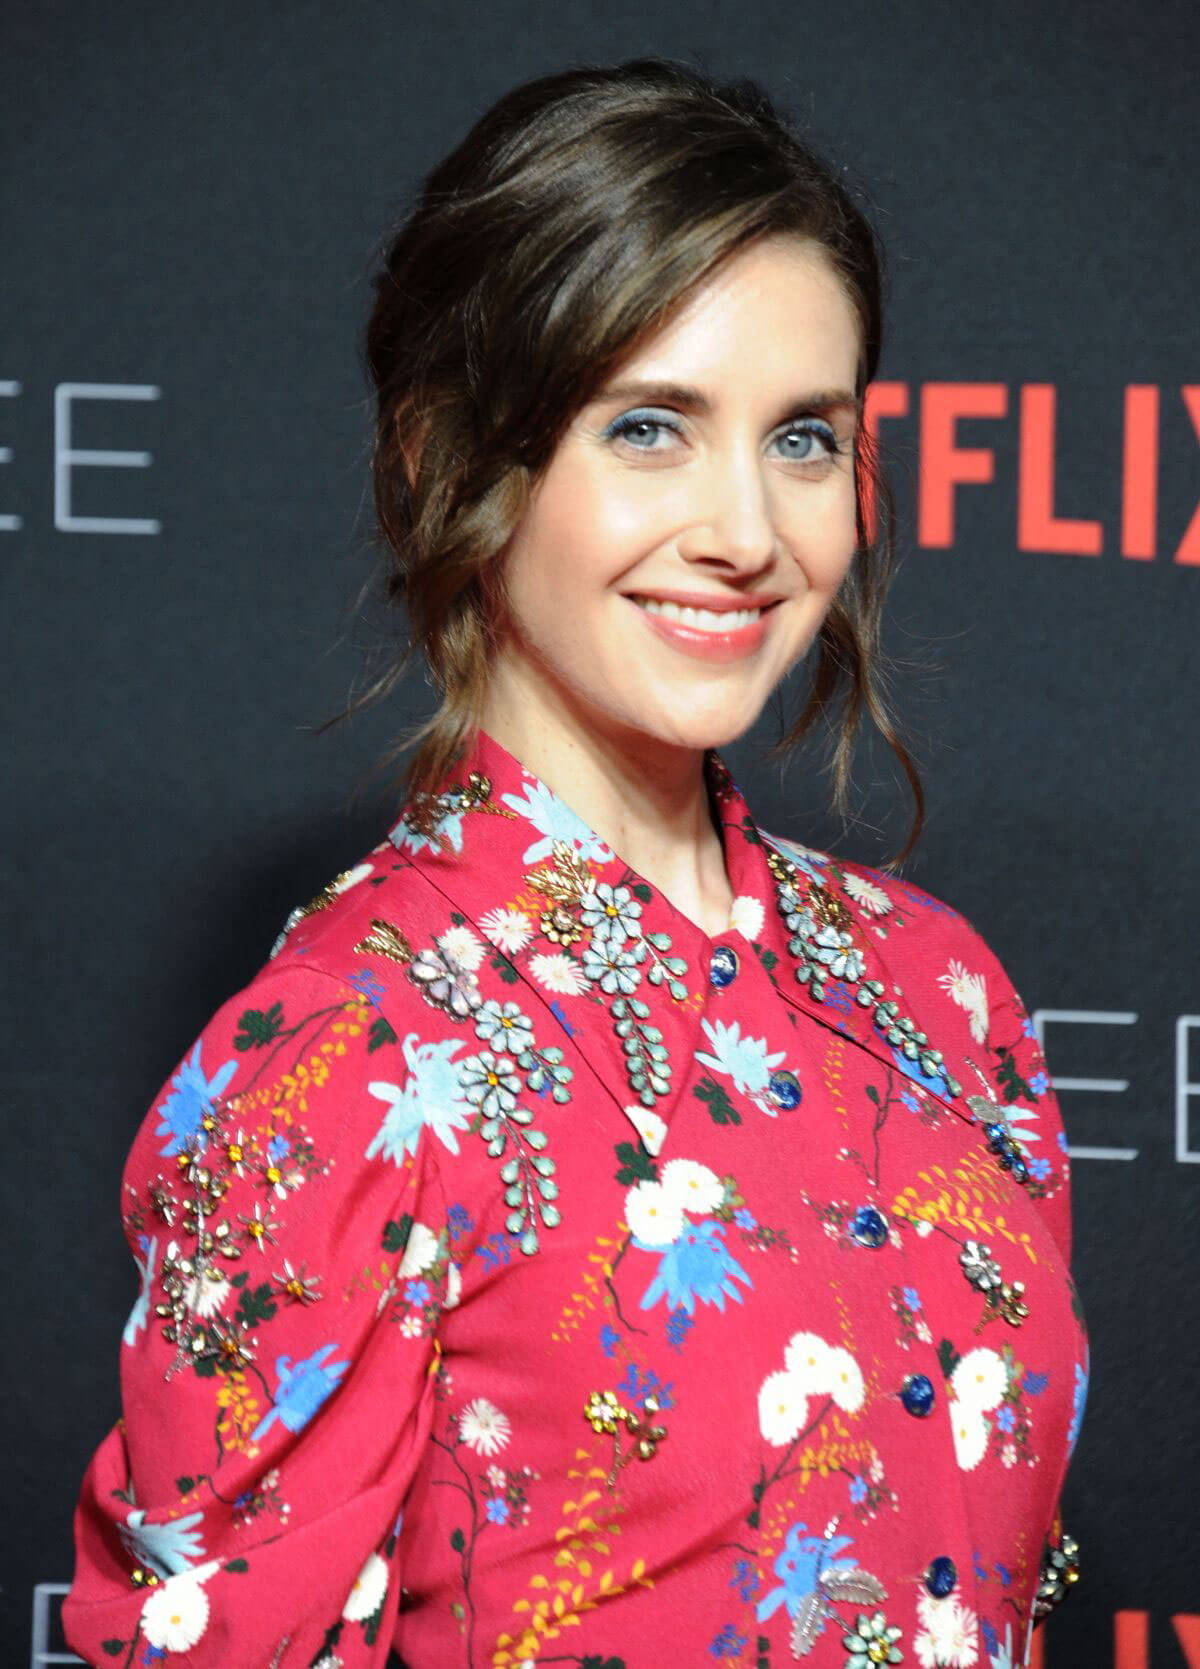 Alison Brie at Glow Netflix Fysee Event in Los Angeles 2018/05/30